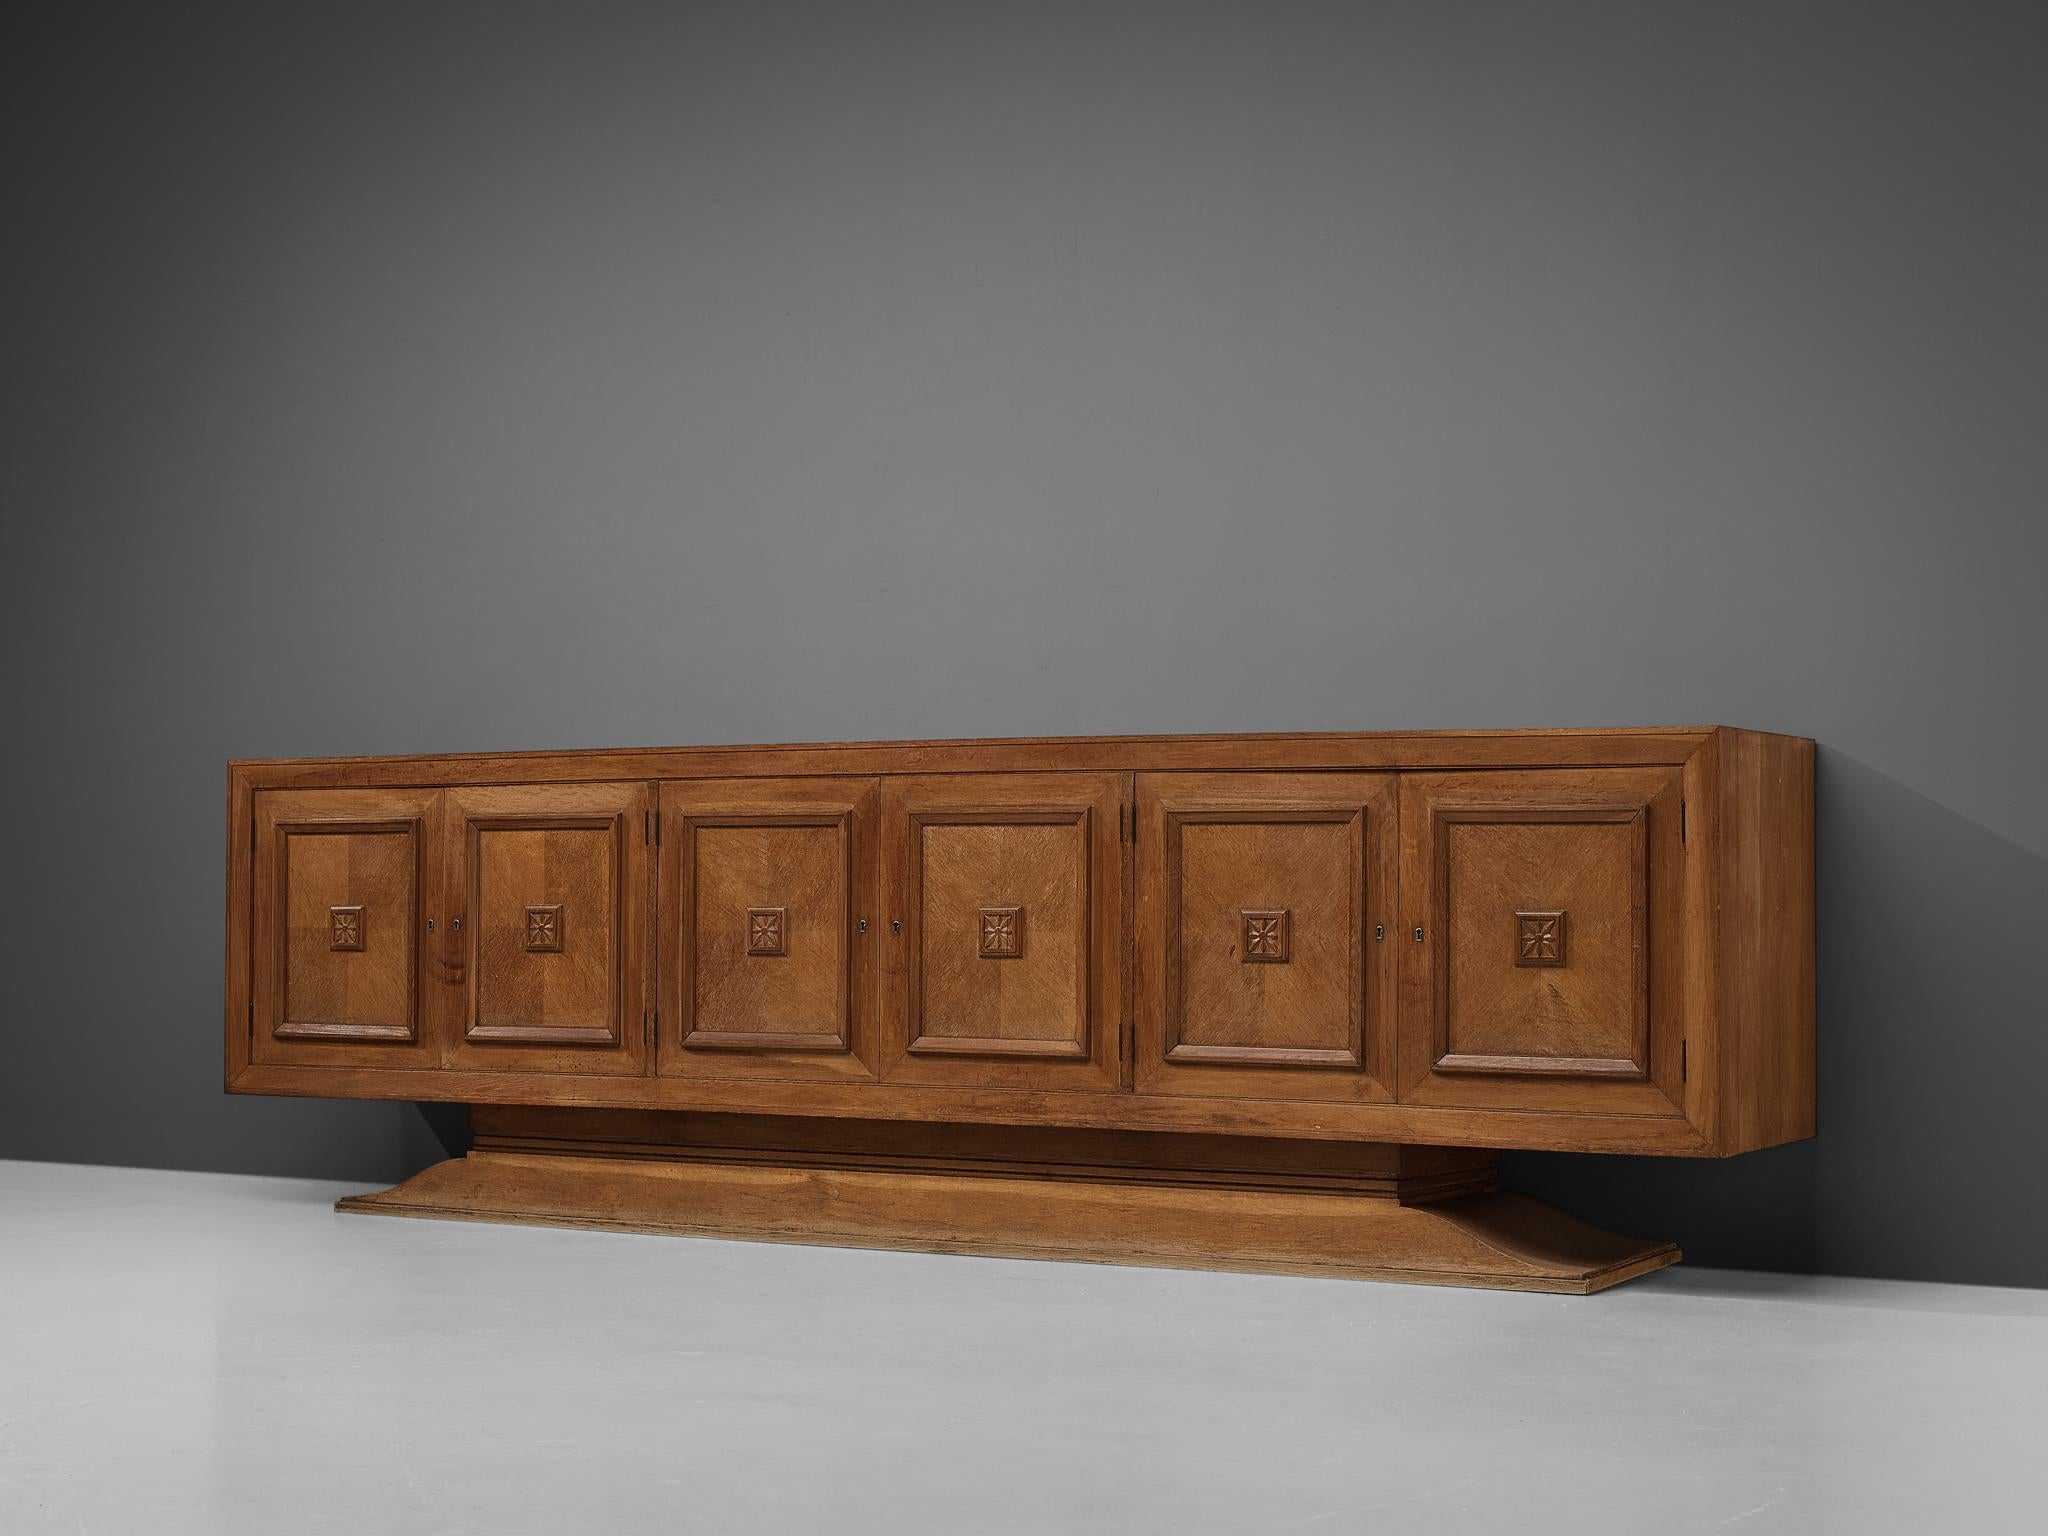 Sideboard, oak, felt, France, 1940s

Grand Art Deco sideboard with five graphical doors. This expressive credenza features striking woodwork. An overall patina contributes to the authentic look of the sideboard. In this sideboard, sturdy elements